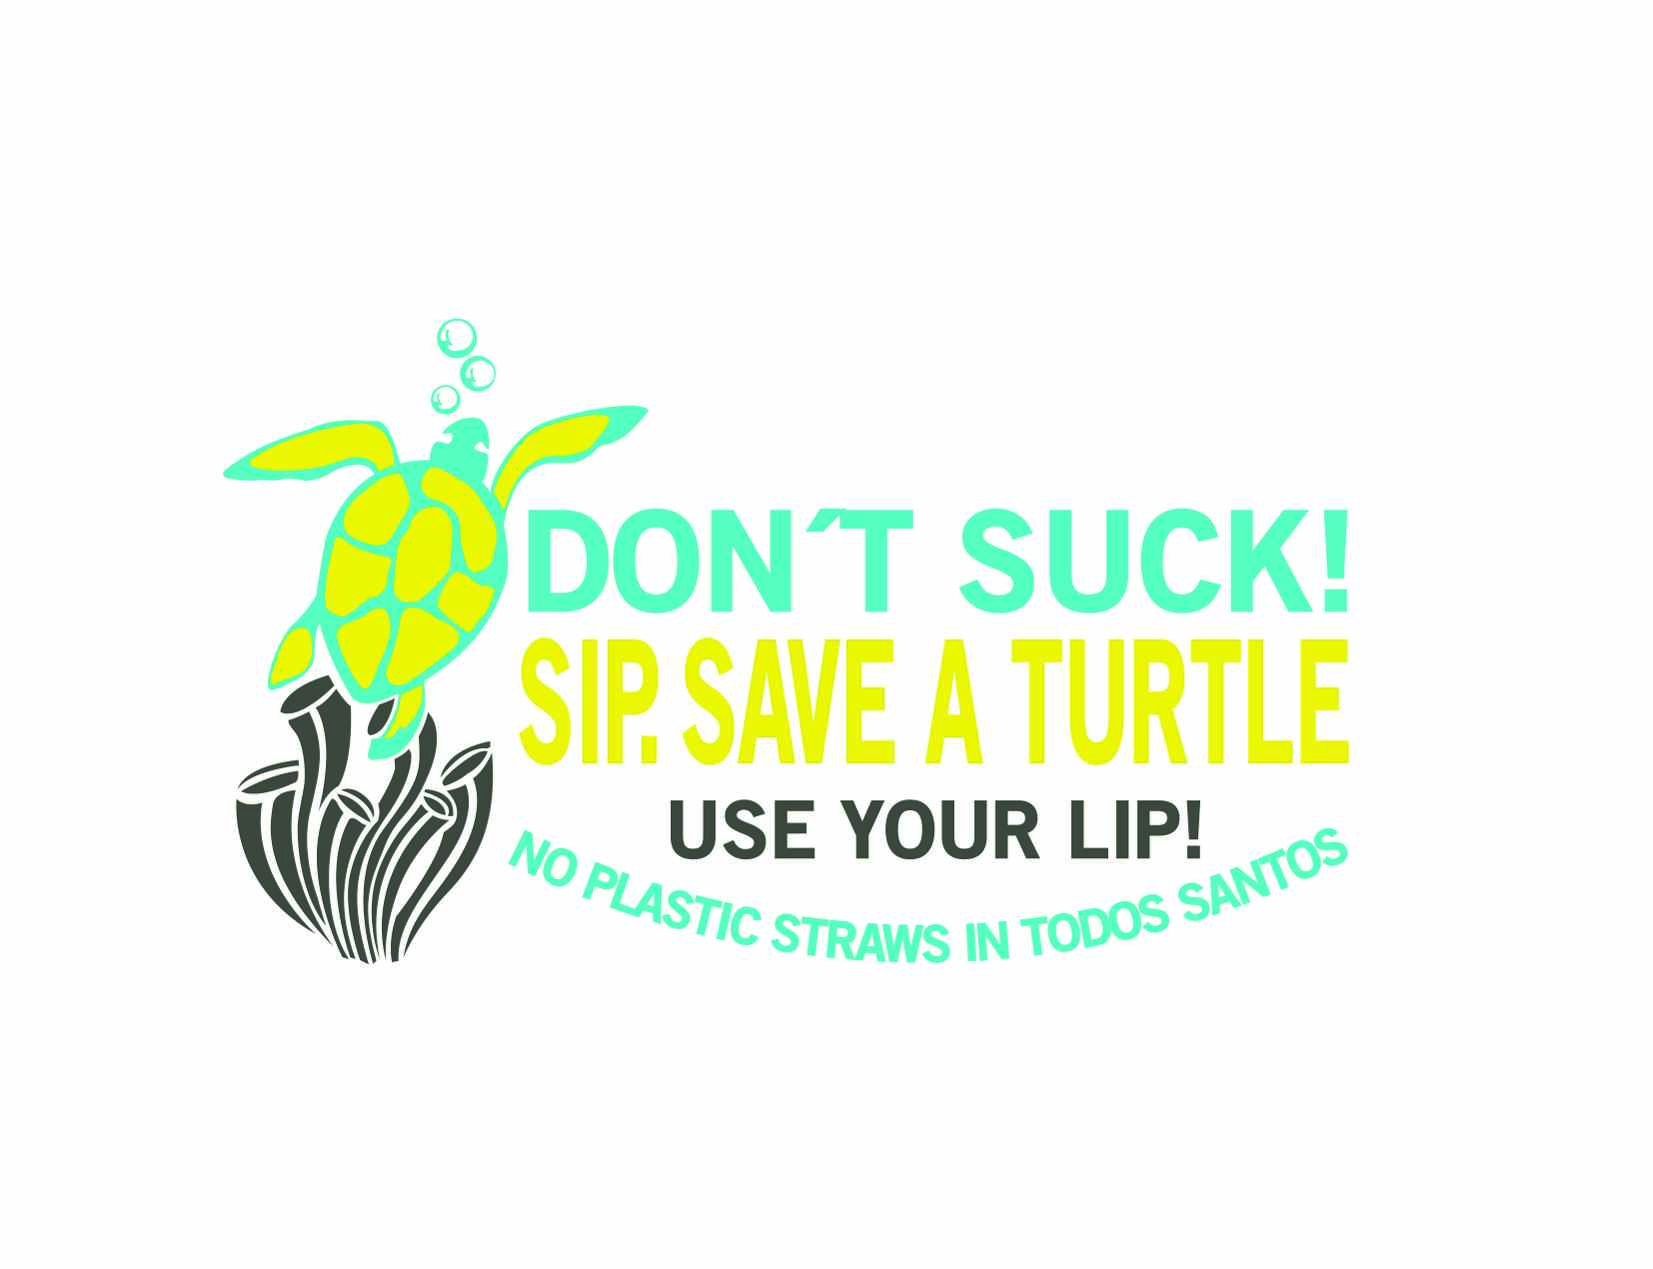 How Many Sea Turtles Die From Plastic Straws A Year